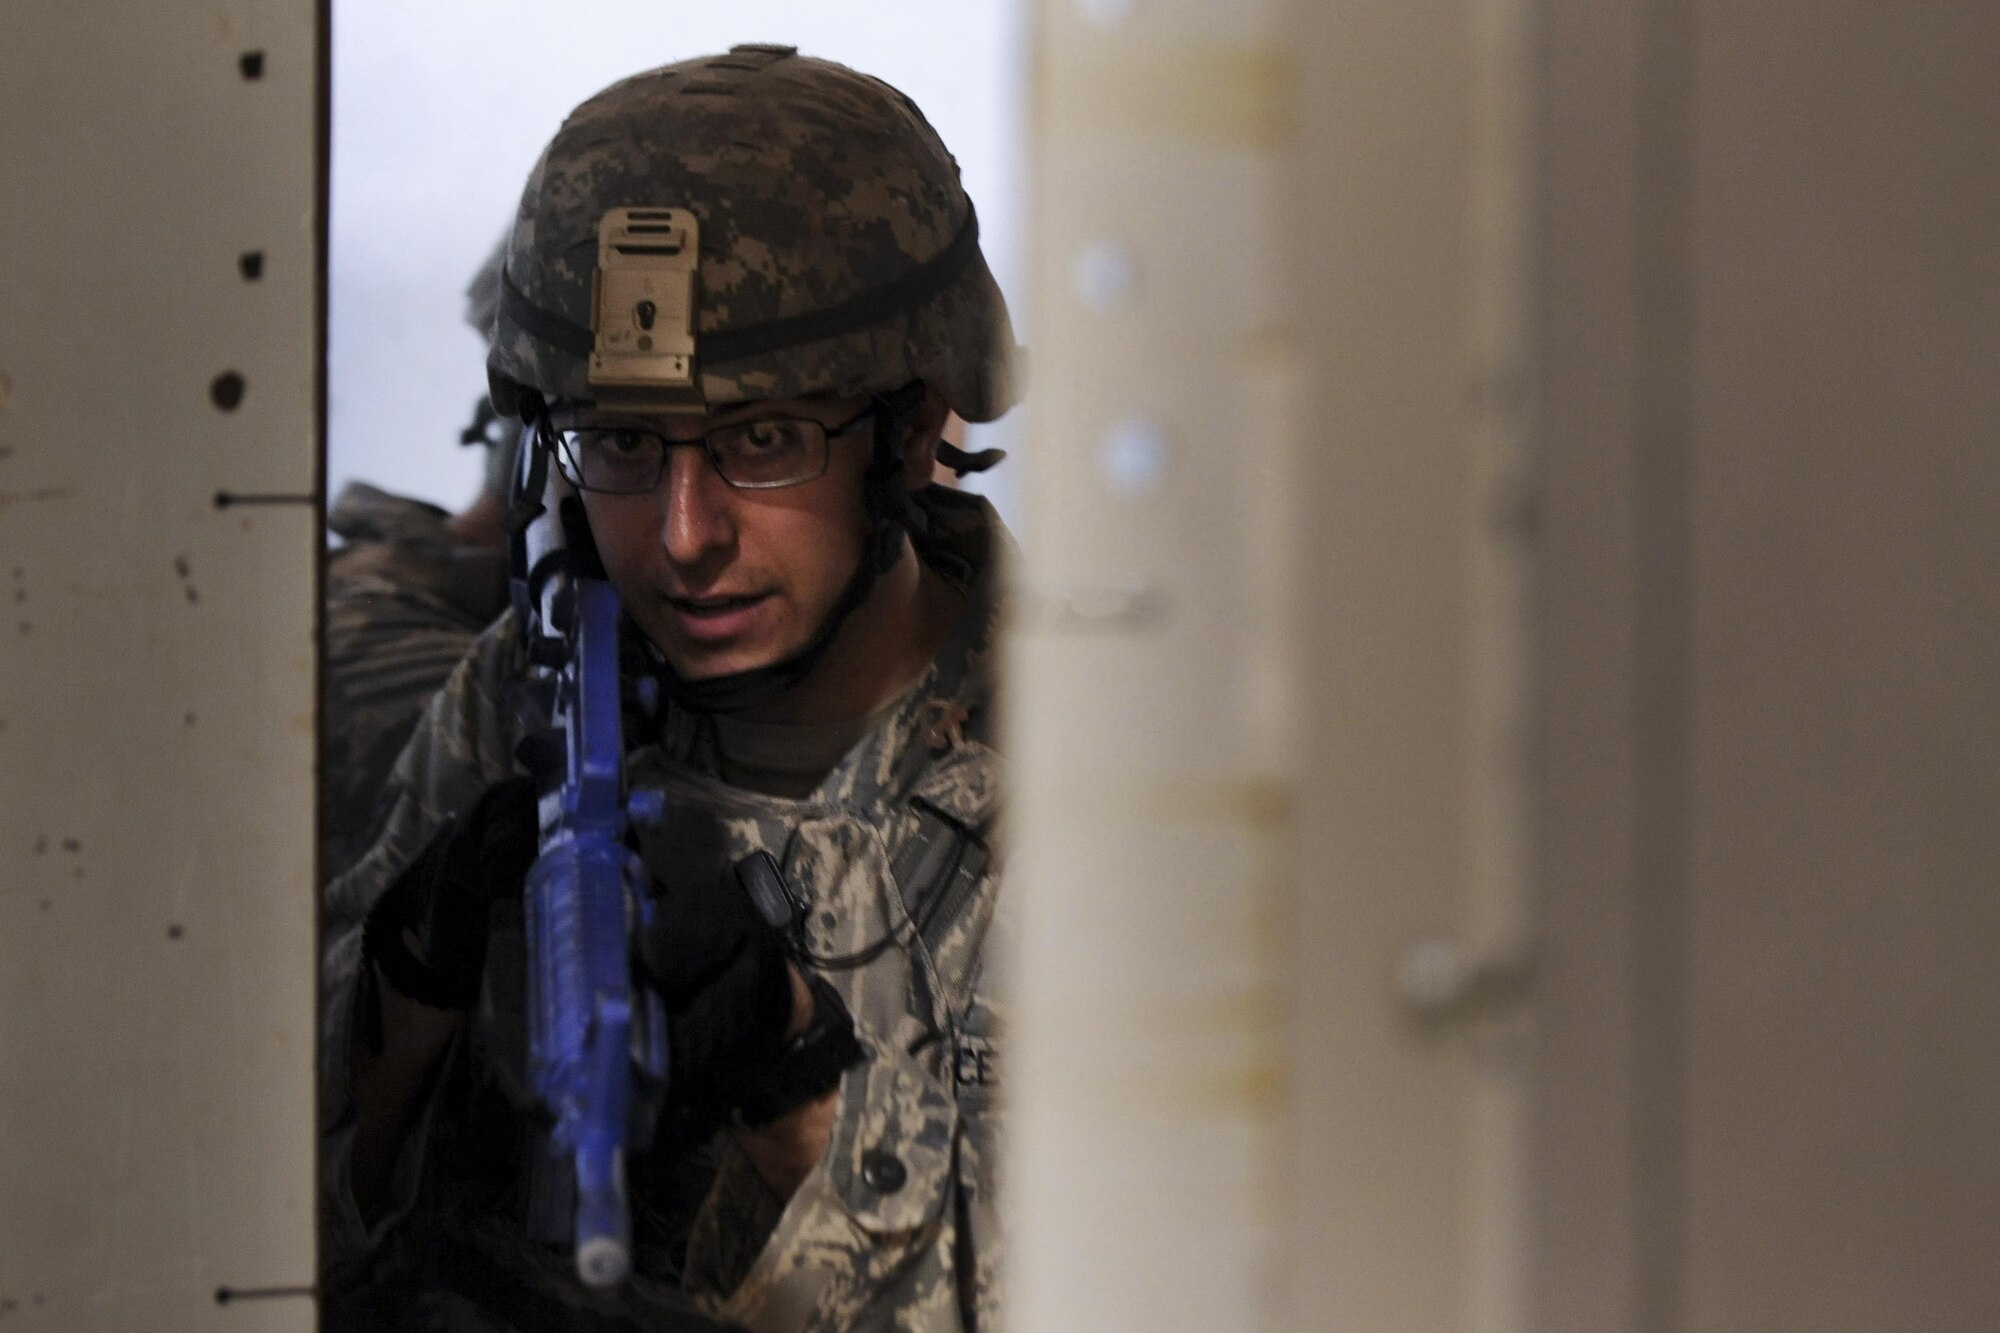 Staff Sgt. Kenneth Delongchamp, 99th Security Forces Squadron member, prepares to enter a doorway during a training scenario in Area II on Nellis Air Force Base, Nev., May 17, 2017. The 99th SFS designs realistic exercises to keep Airmen in a warrior mindset and sharpen tactics, techniques and procedures to prevent unnecessary loss of life and injuries in the event of a real-world incident. (U.S. Air Force photo by Senior Airman Kevin Tanenbaum/Released)